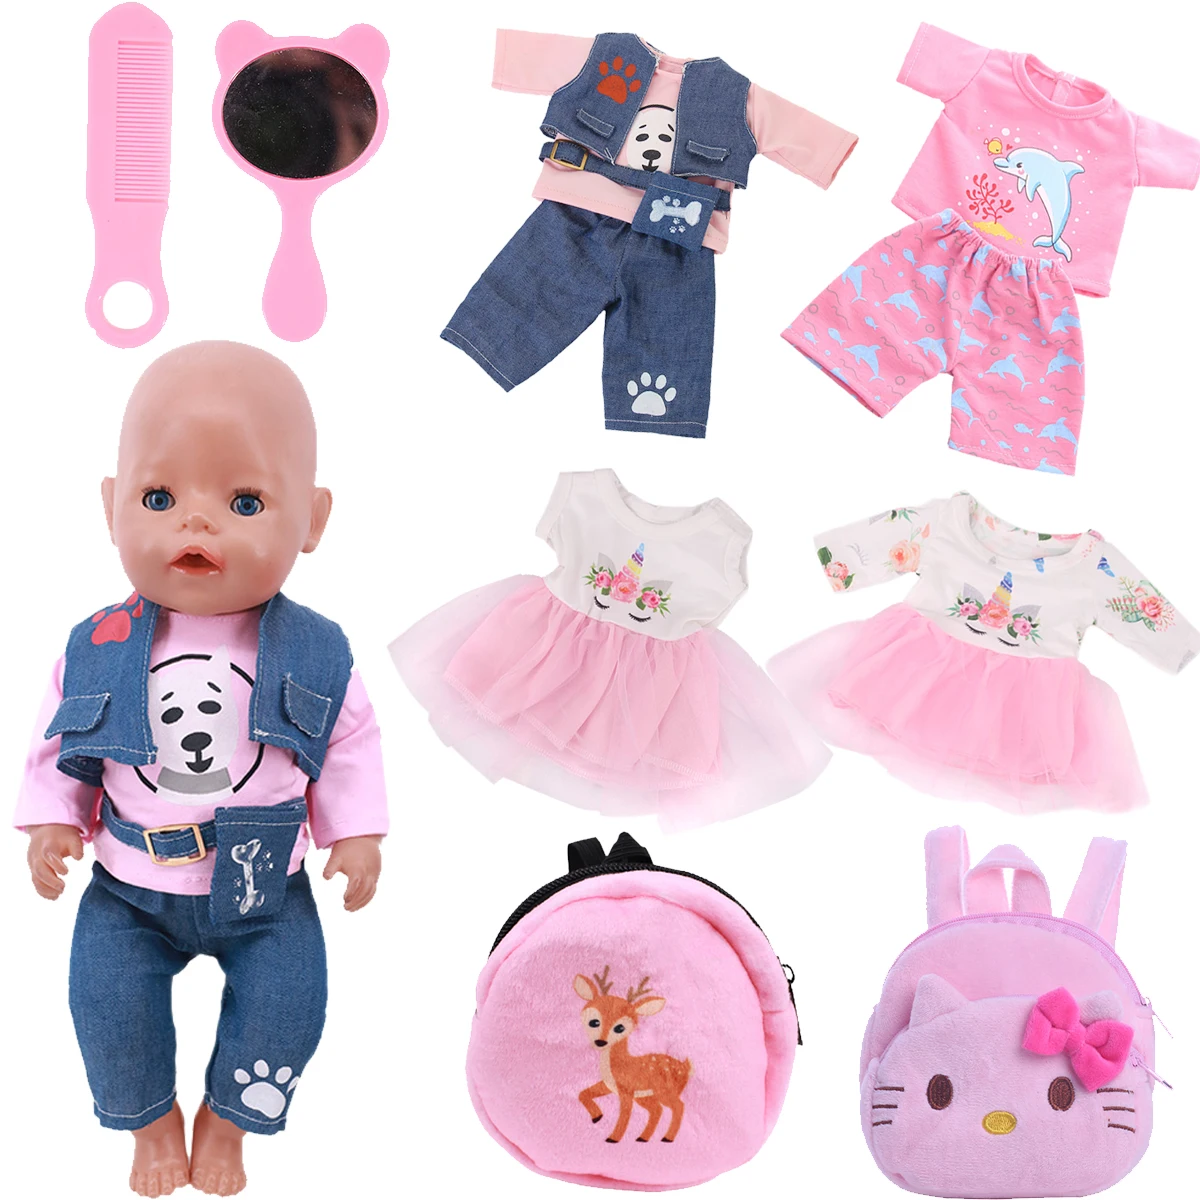 

New style Pink Series Clothes Dress bags Fit16-18 Inch American of Girl 's&43 CM Reborn New Born Baby Doll Our Generation Toy